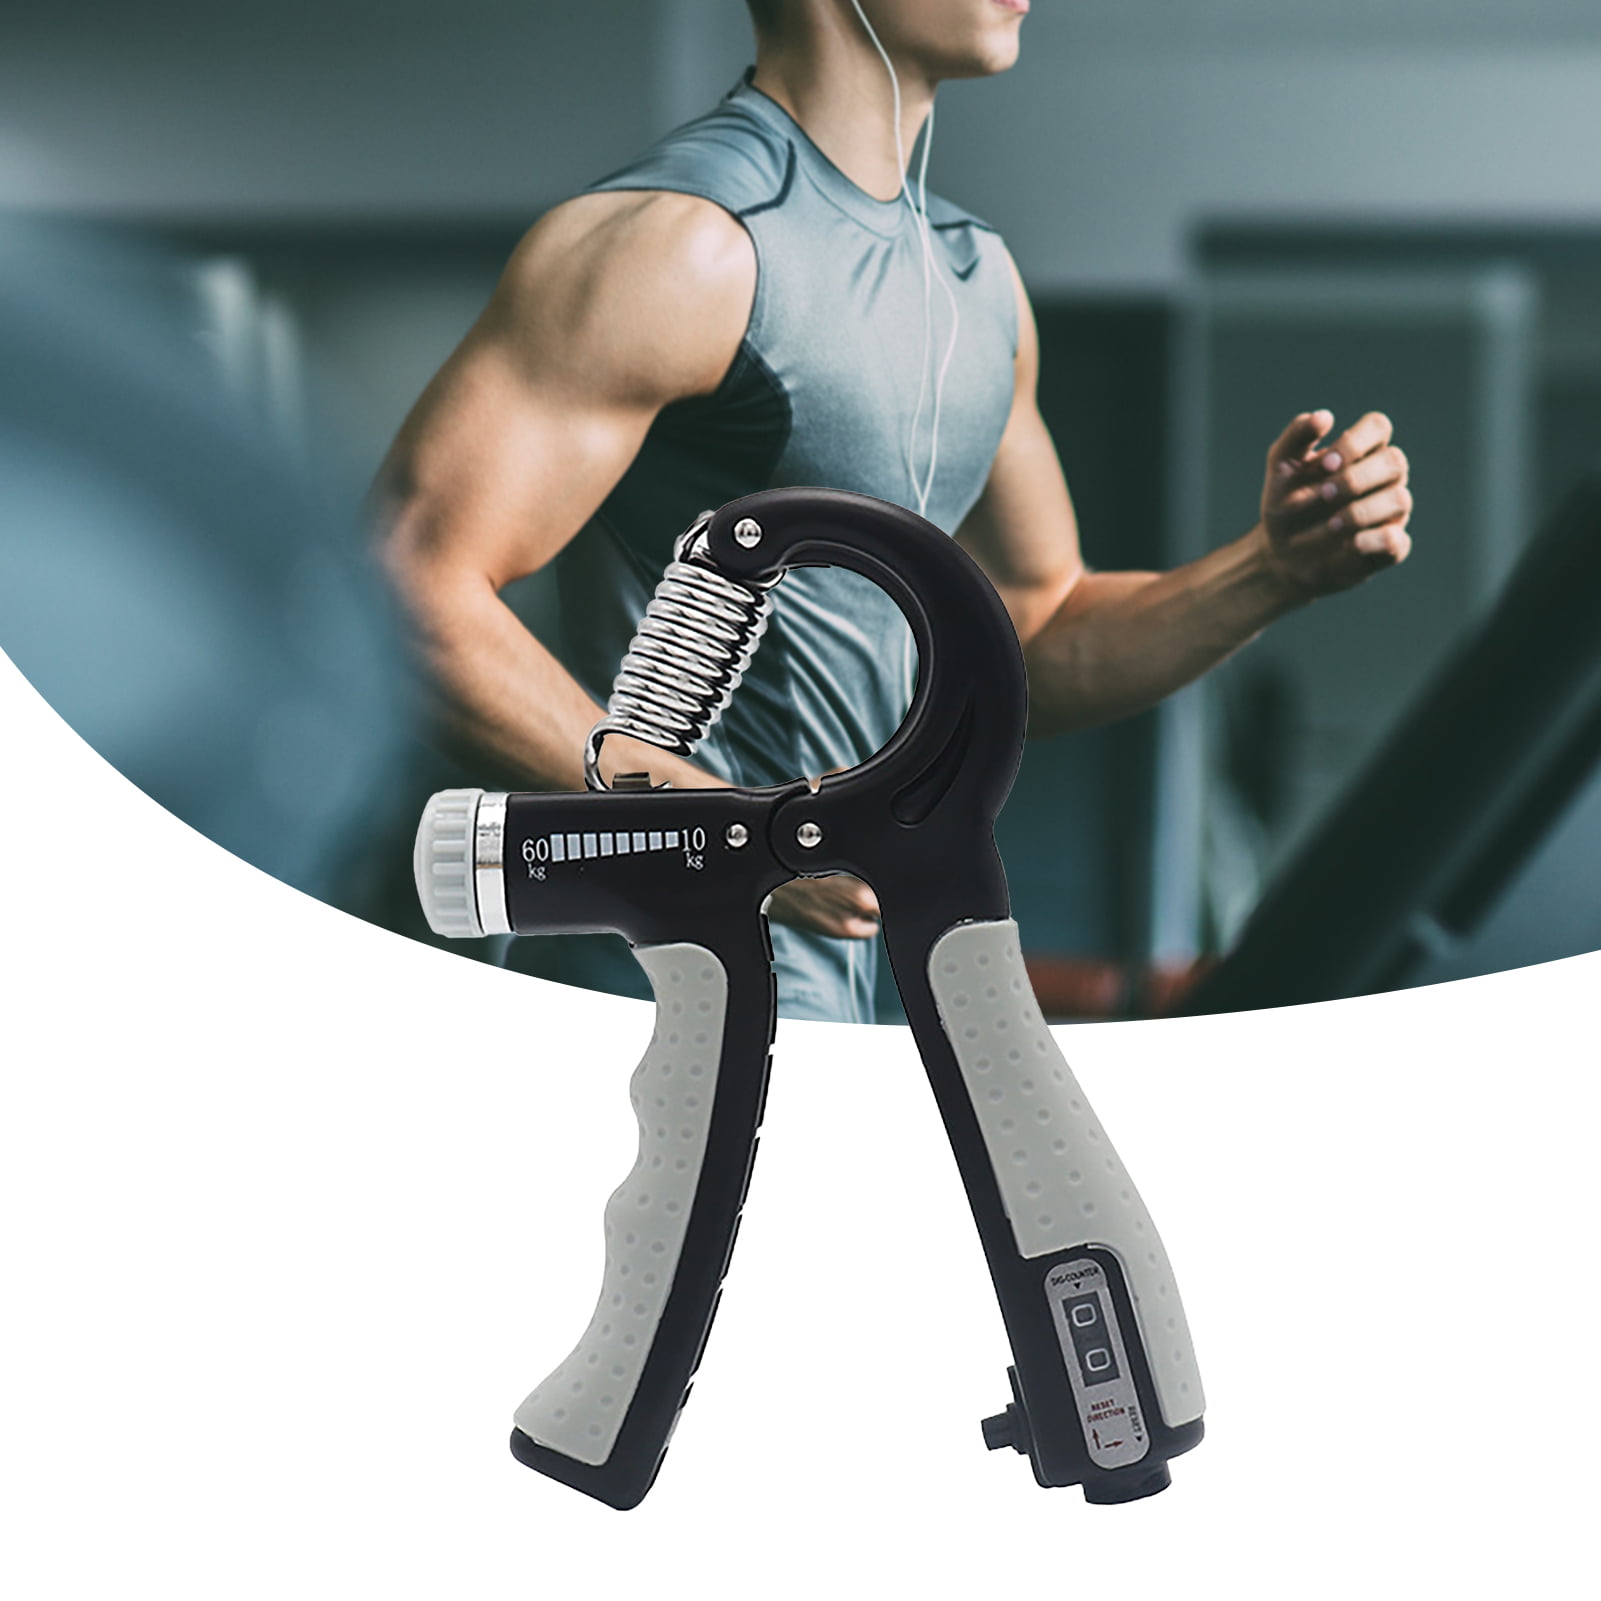 Juhai Gripper with R-Shape ABS Adjustable Resistance Forearm Trainer Fitness Equipment - Walmart.com